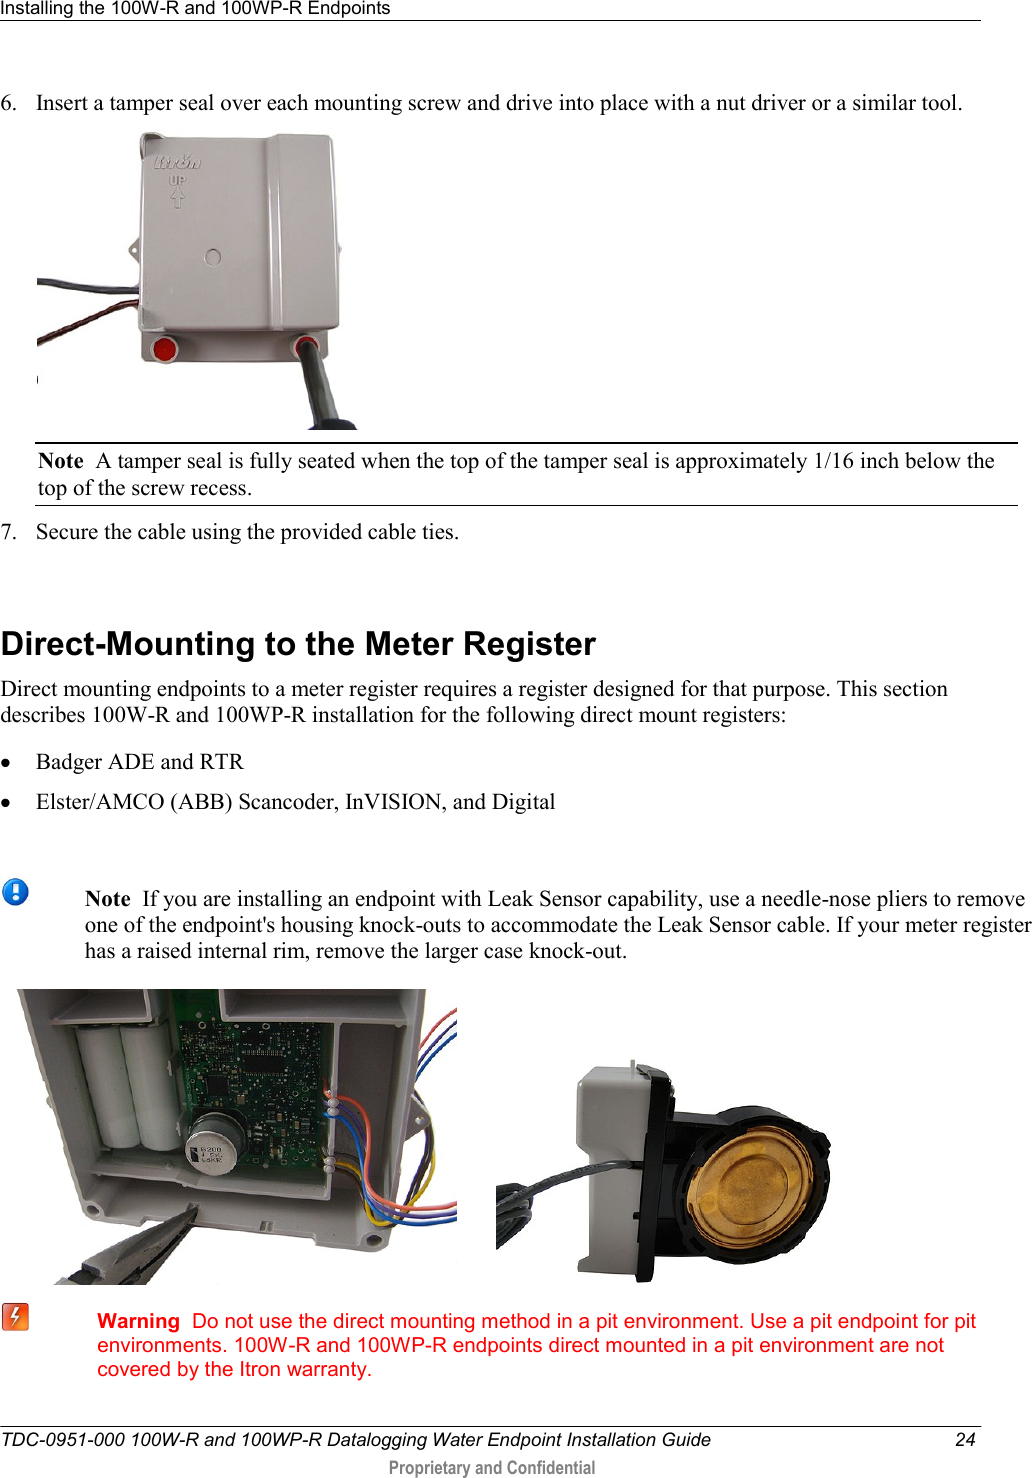 Installing the 100W-R and 100WP-R Endpoints   TDC-0951-000 100W-R and 100WP-R Datalogging Water Endpoint Installation Guide  24  Proprietary and Confidential    6. Insert a tamper seal over each mounting screw and drive into place with a nut driver or a similar tool.  Note  A tamper seal is fully seated when the top of the tamper seal is approximately 1/16 inch below the top of the screw recess. 7. Secure the cable using the provided cable ties.    Direct-Mounting to the Meter Register Direct mounting endpoints to a meter register requires a register designed for that purpose. This section describes 100W-R and 100WP-R installation for the following direct mount registers:  Badger ADE and RTR  Elster/AMCO (ABB) Scancoder, InVISION, and Digital   Note  If you are installing an endpoint with Leak Sensor capability, use a needle-nose pliers to remove one of the endpoint&apos;s housing knock-outs to accommodate the Leak Sensor cable. If your meter register has a raised internal rim, remove the larger case knock-out.              Warning  Do not use the direct mounting method in a pit environment. Use a pit endpoint for pit environments. 100W-R and 100WP-R endpoints direct mounted in a pit environment are not covered by the Itron warranty.  